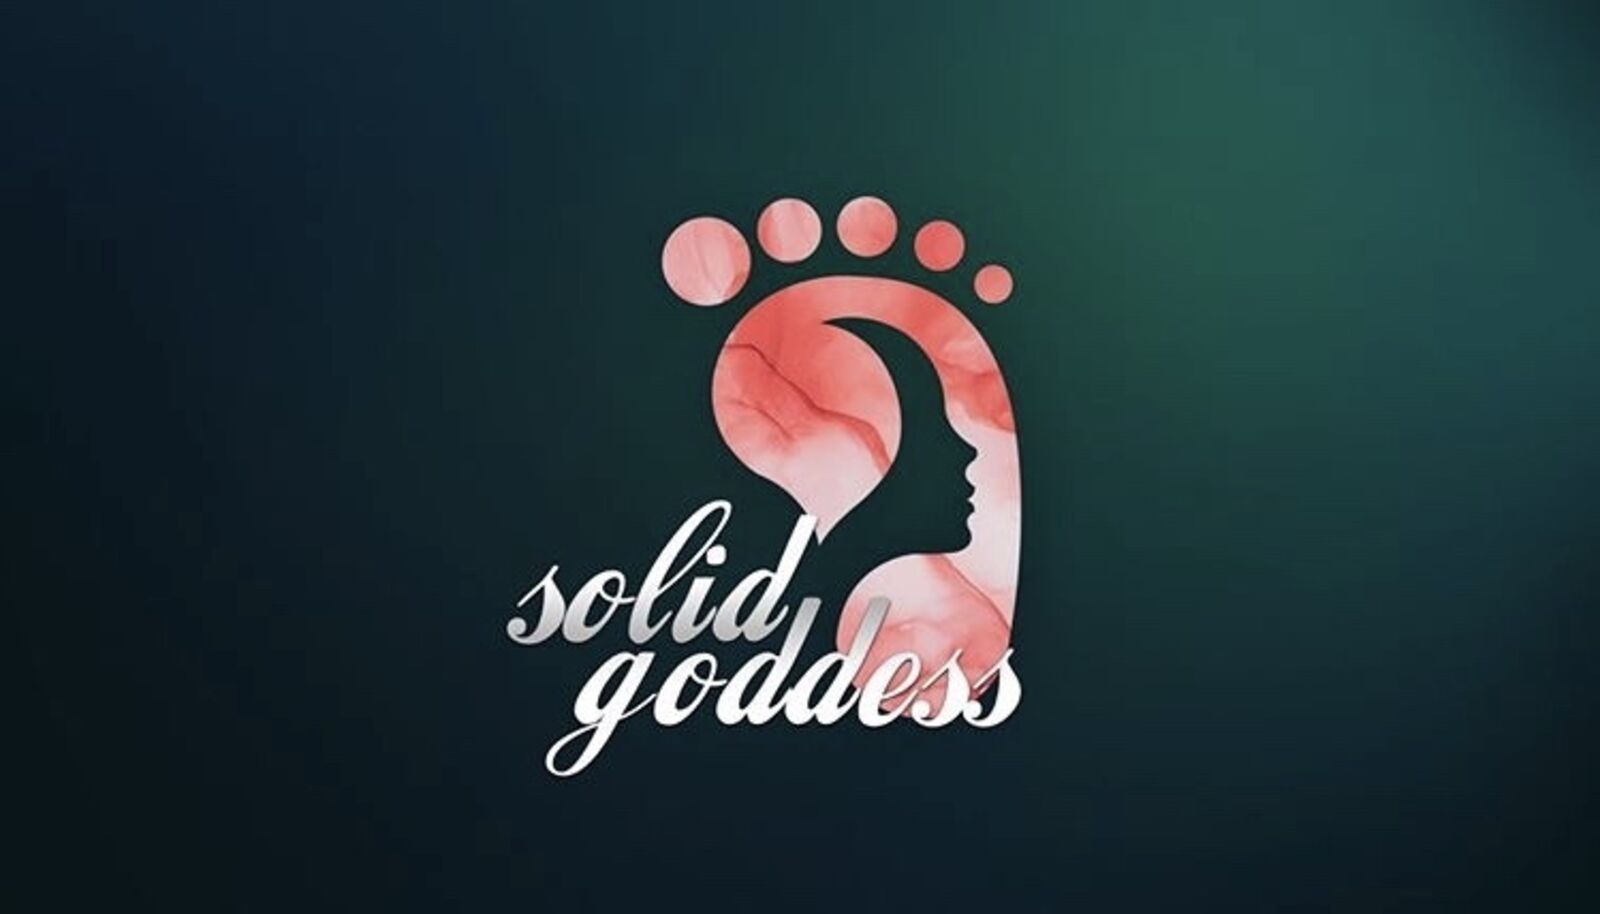 See Solid.goddess profile